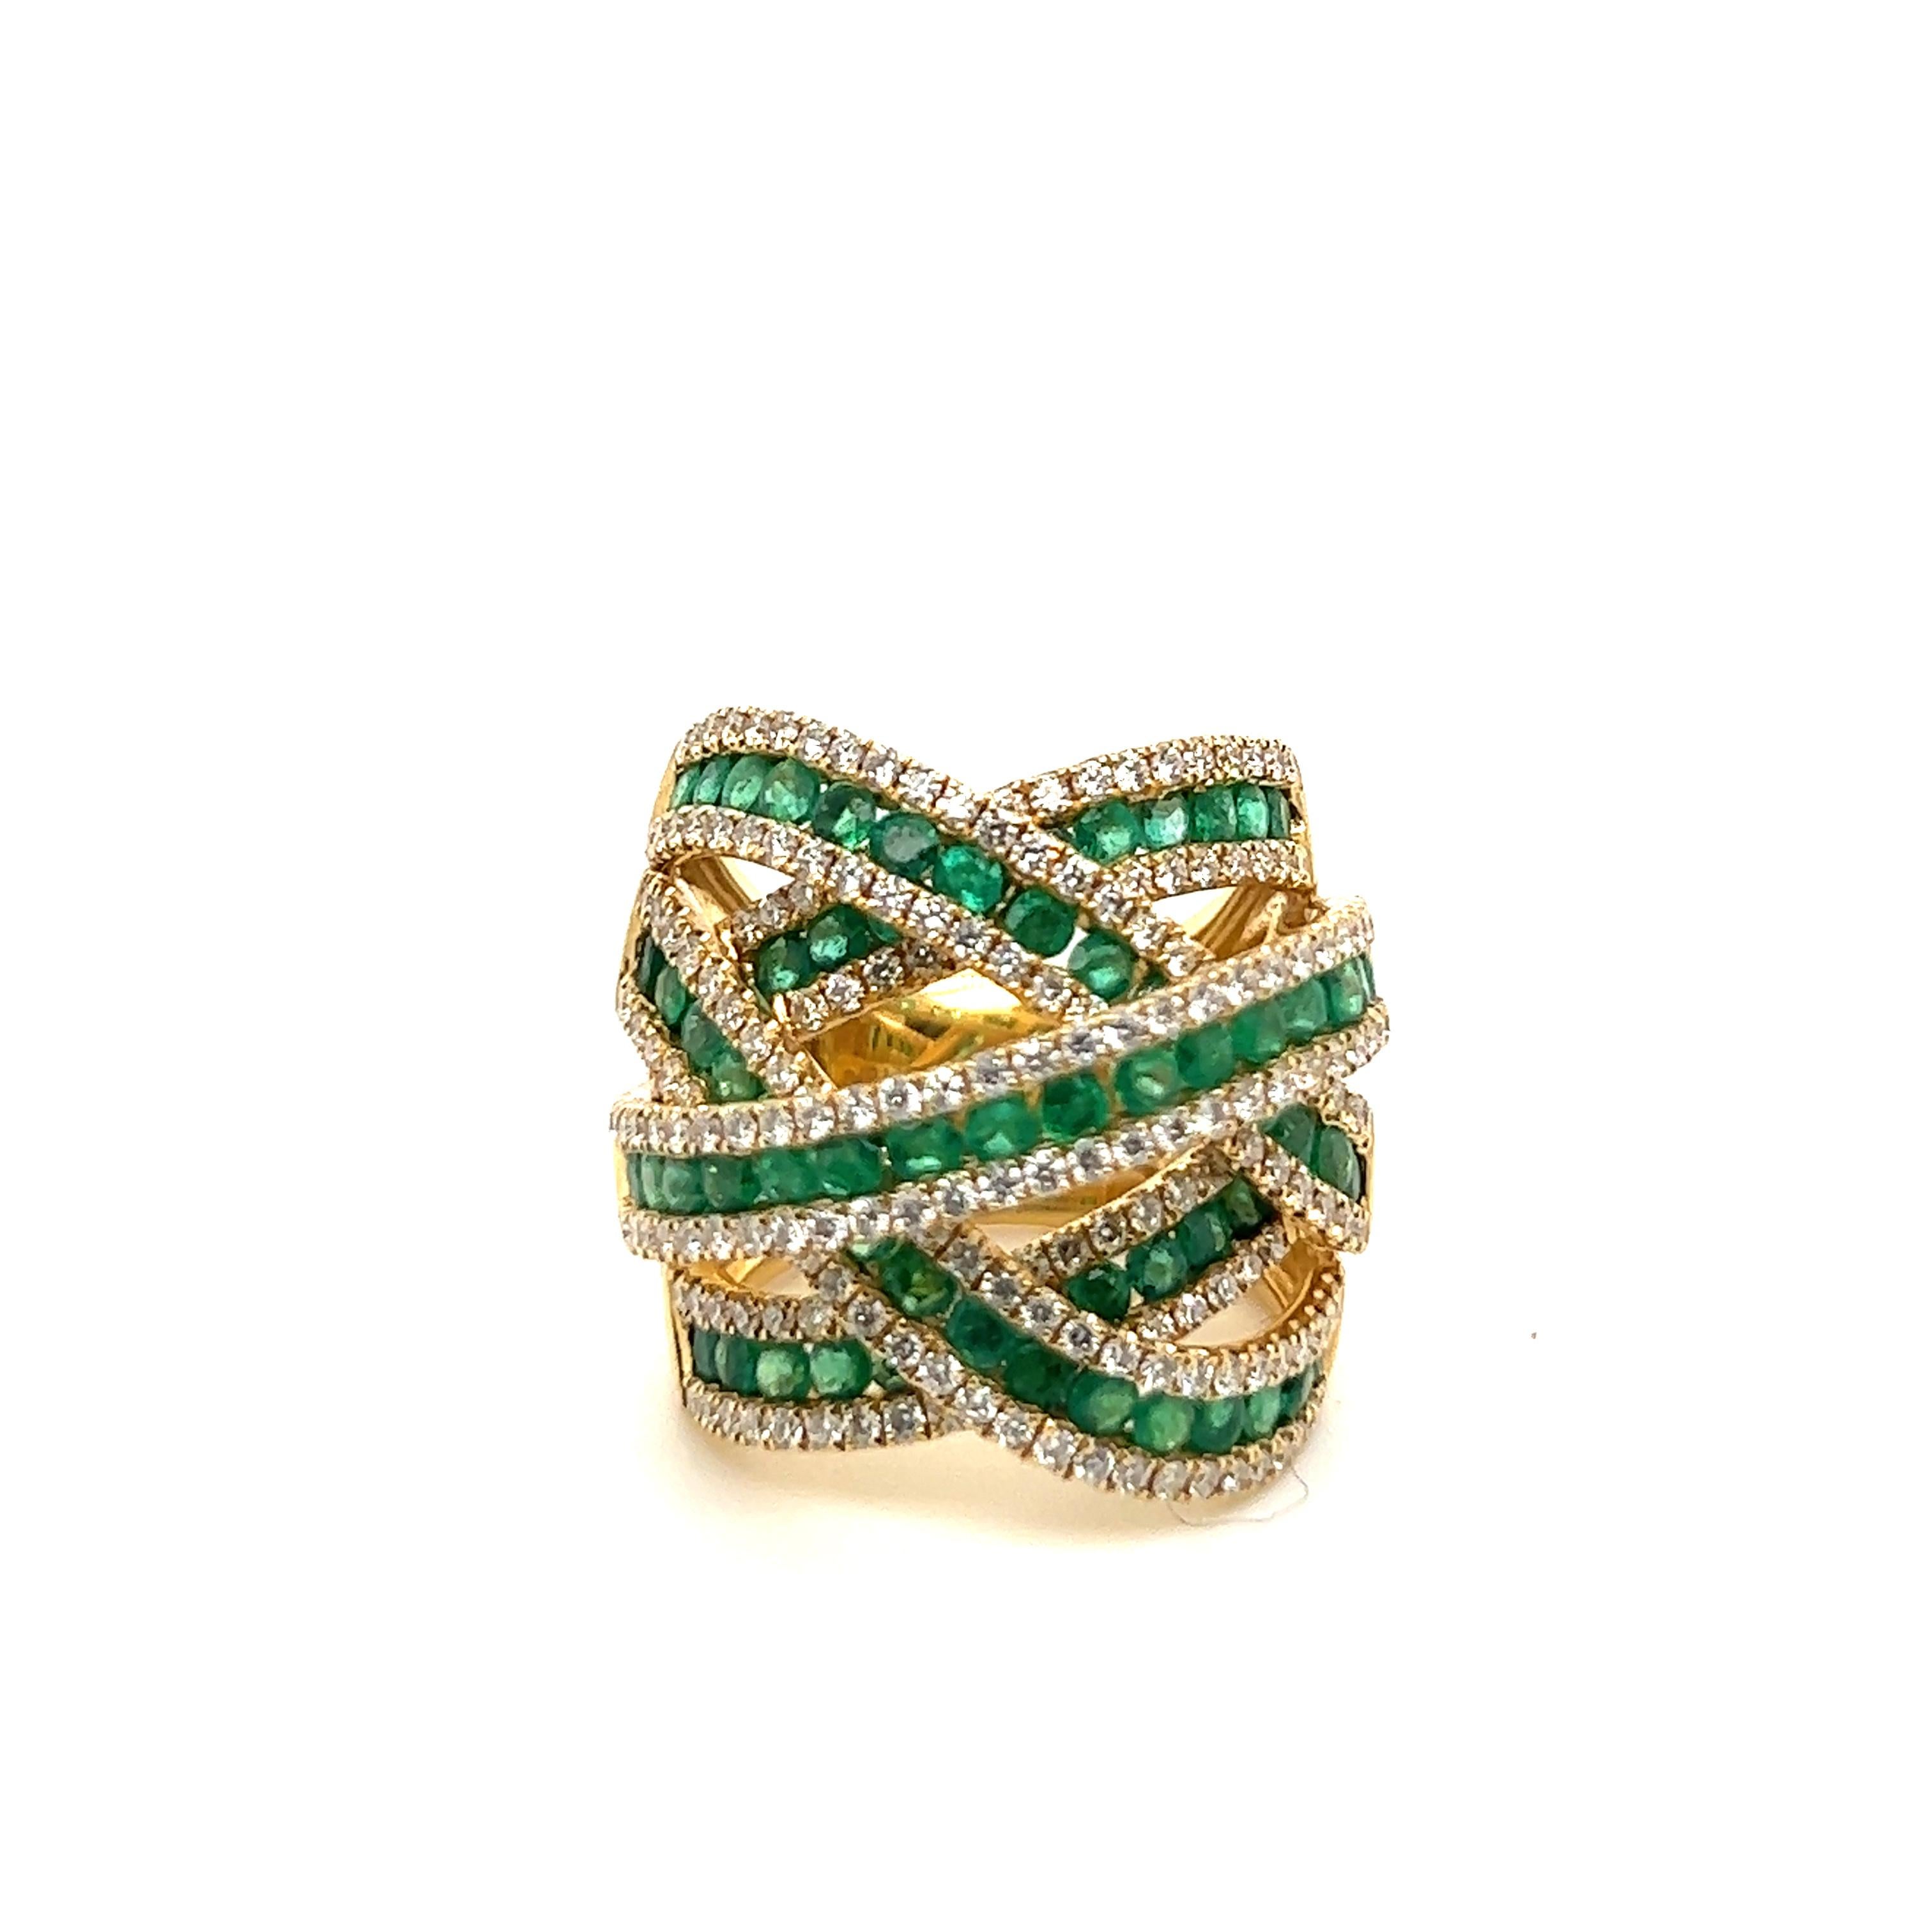 18 Karat Yellow Gold with Diamonds and Emeralds De Grisogono Inspired Style Ring For Sale 4